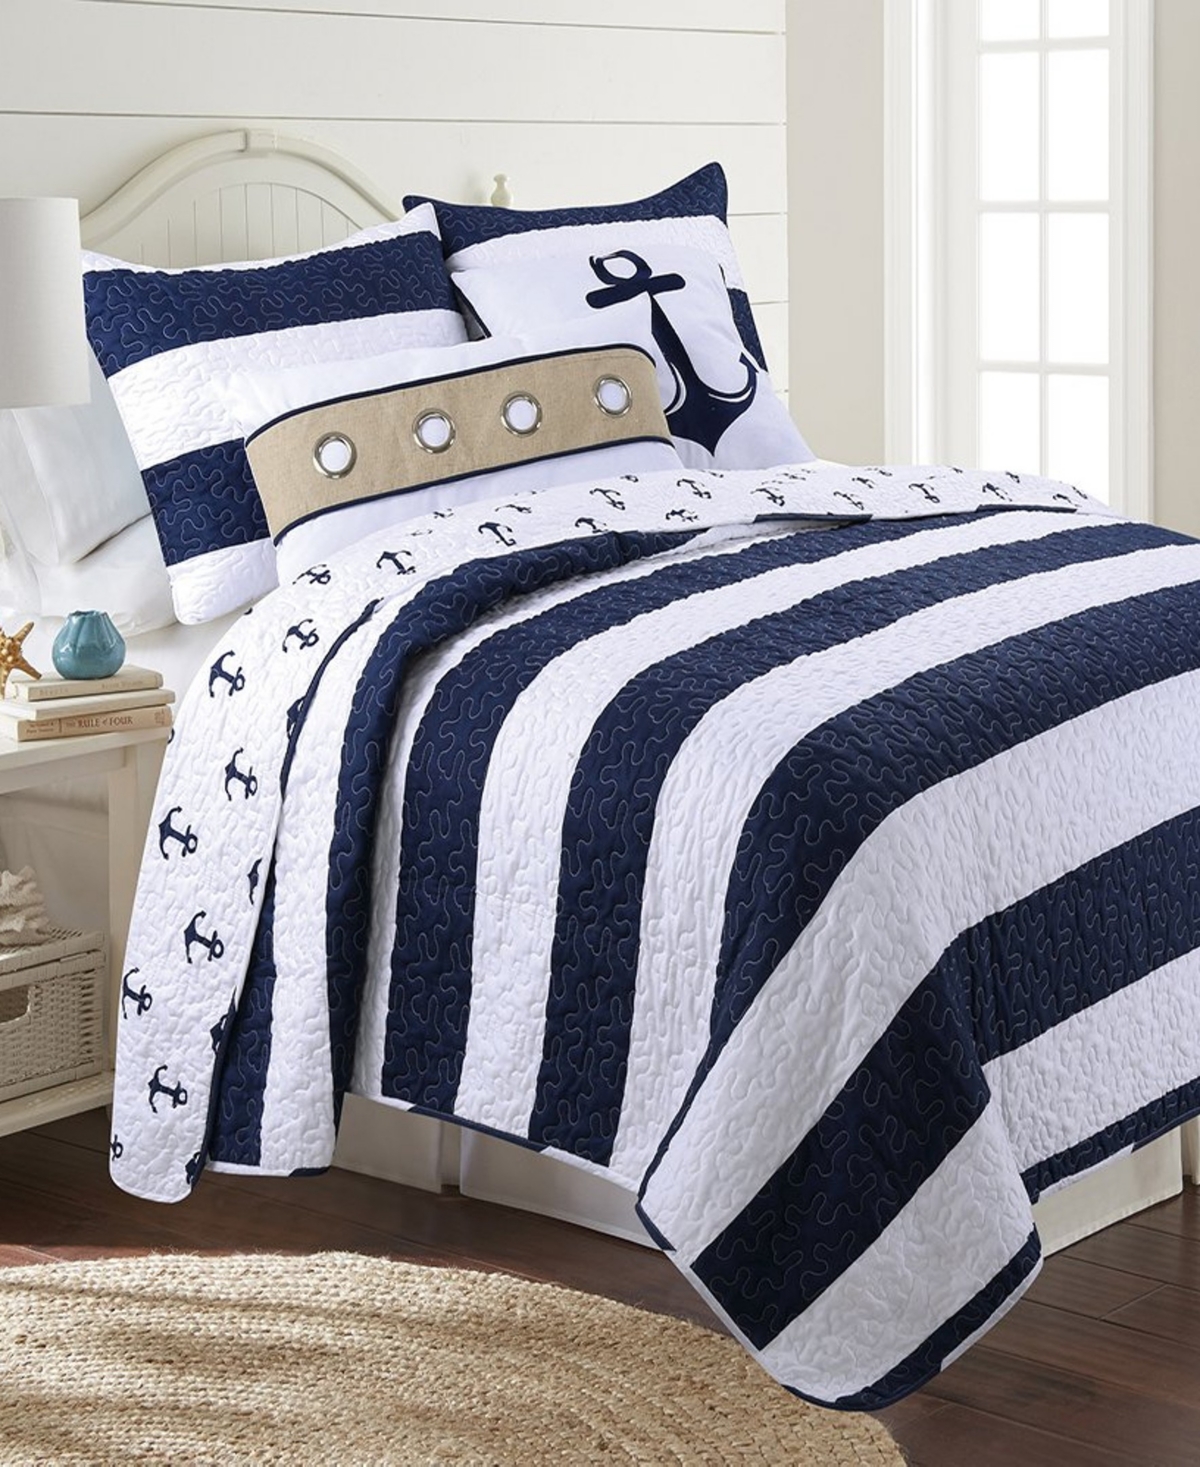 Elise And James Home Hallie Nautical Reversible 2-piece Quilt Set, Twin In Navy